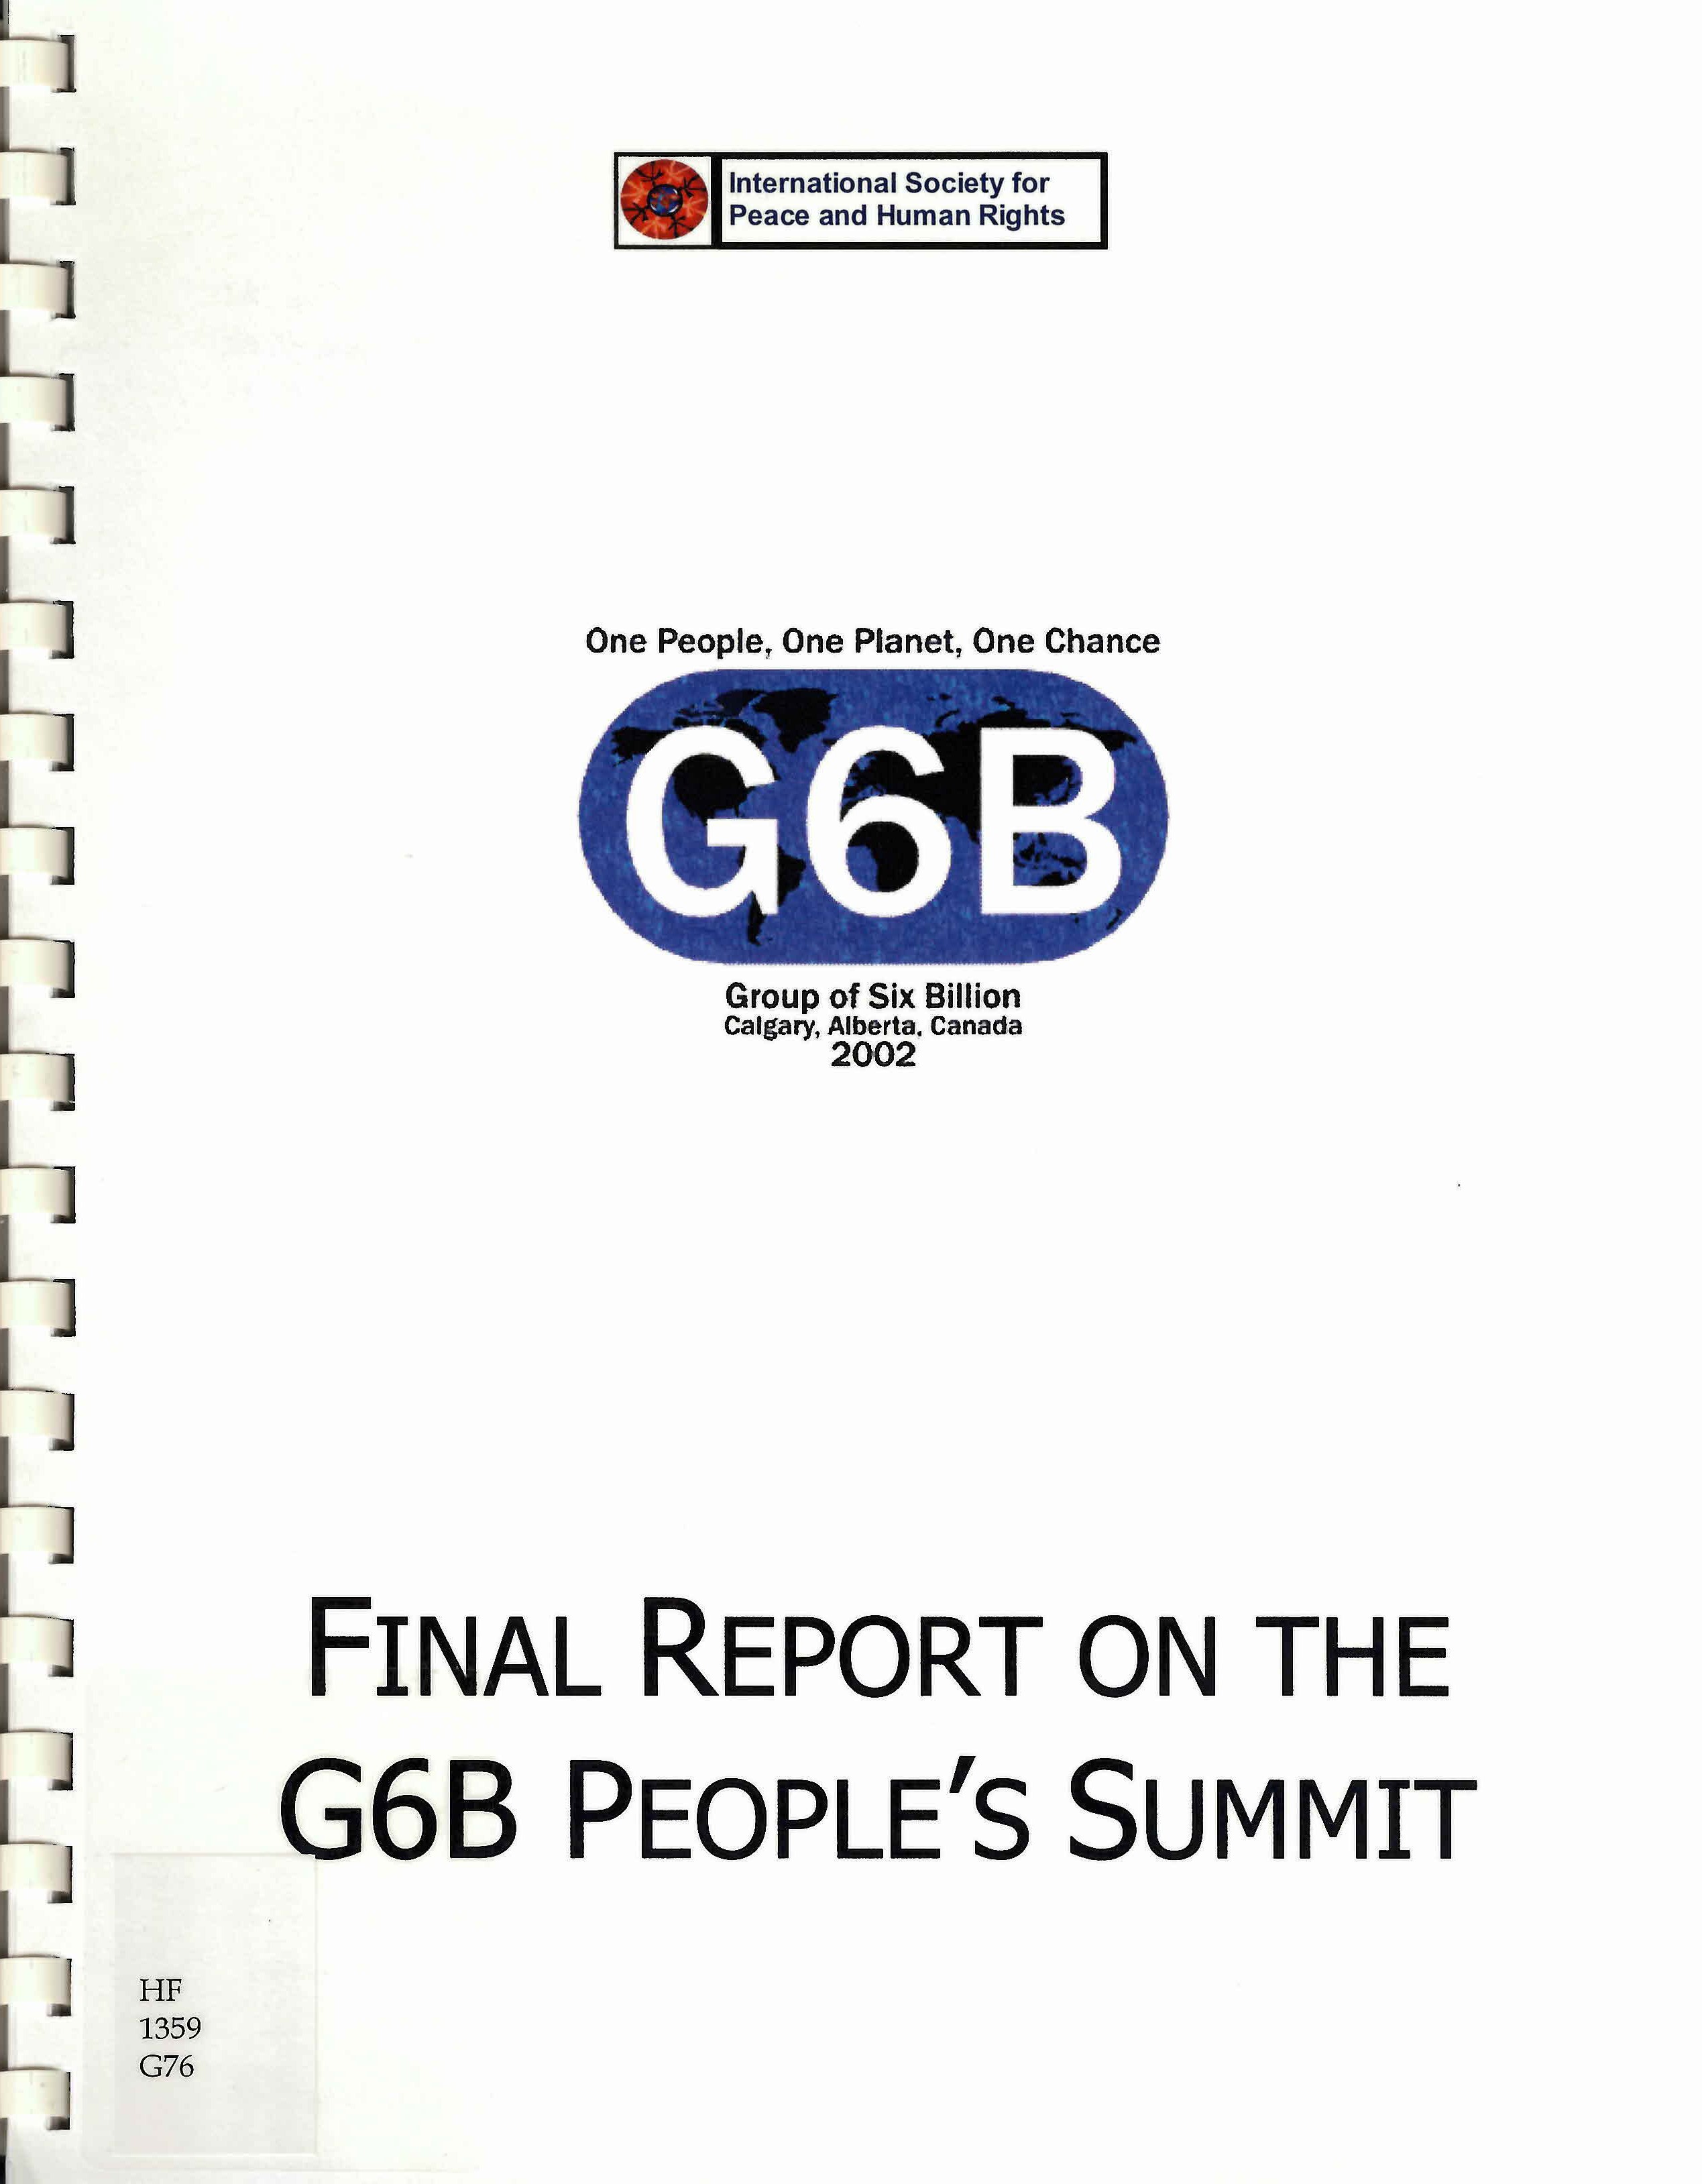 Final report on the G6B people's summit